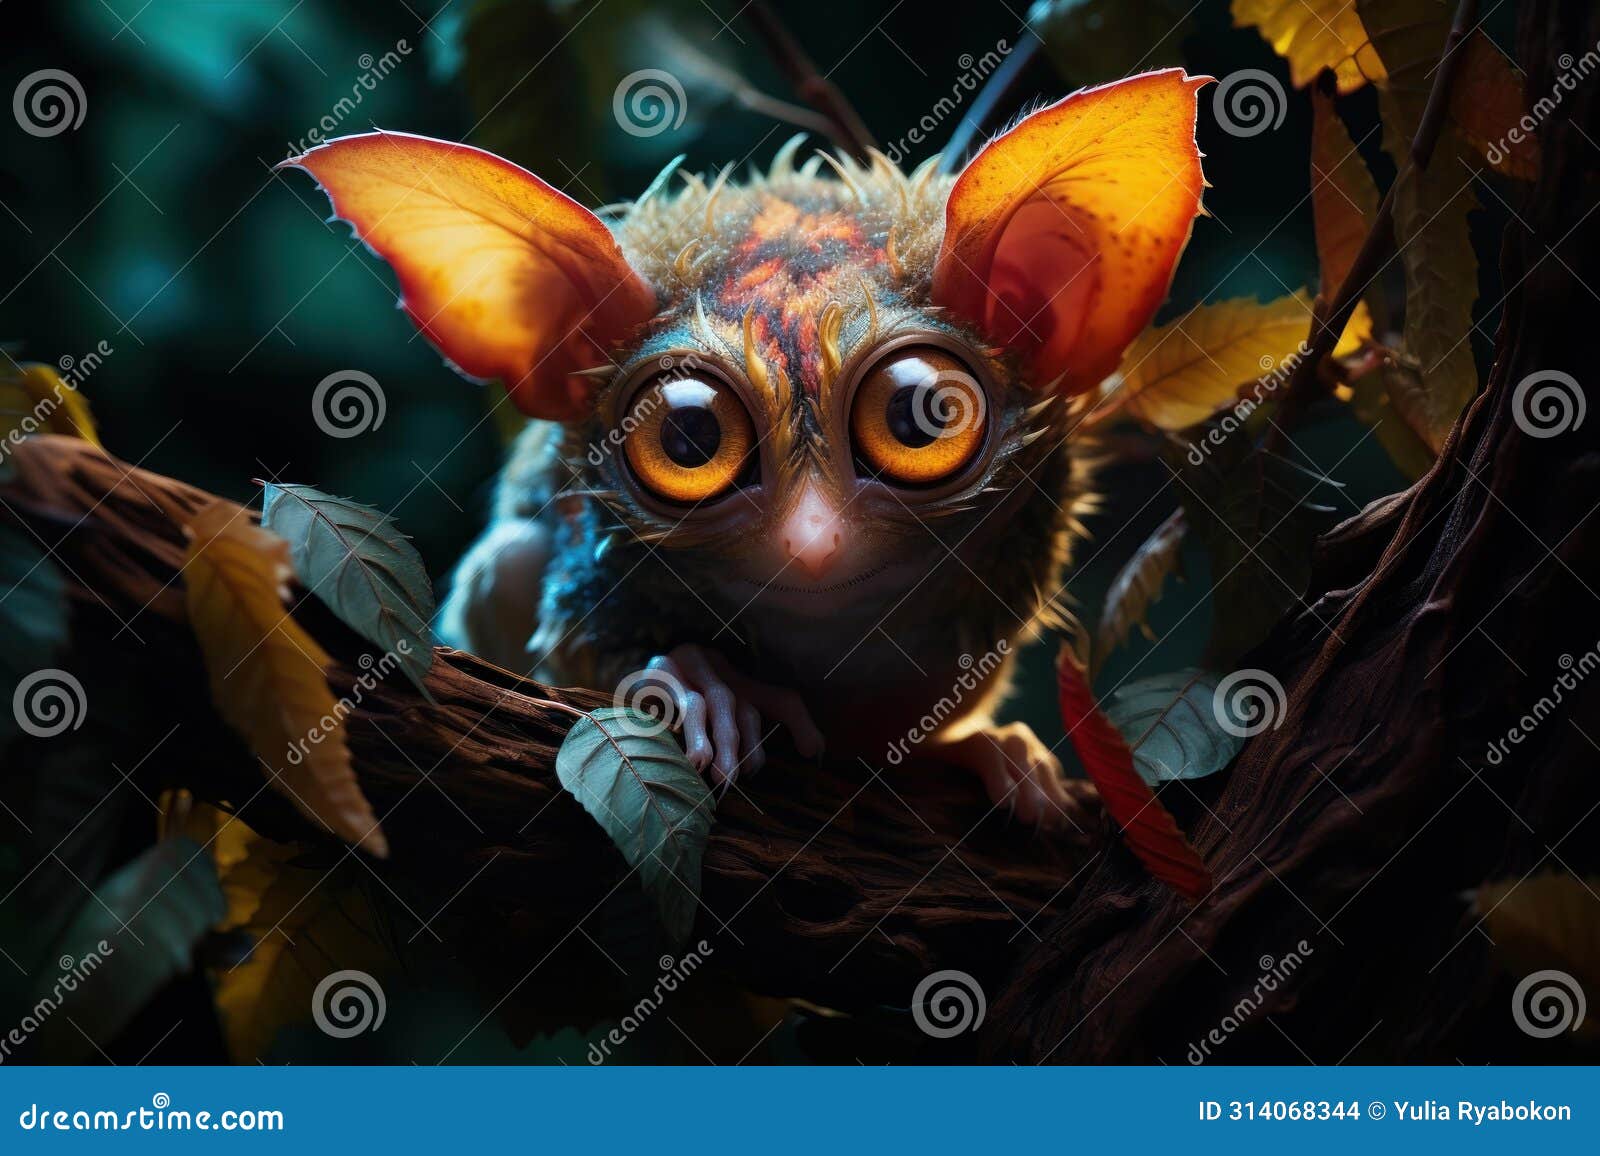 small-sized spectral tarsier animal. generate ai